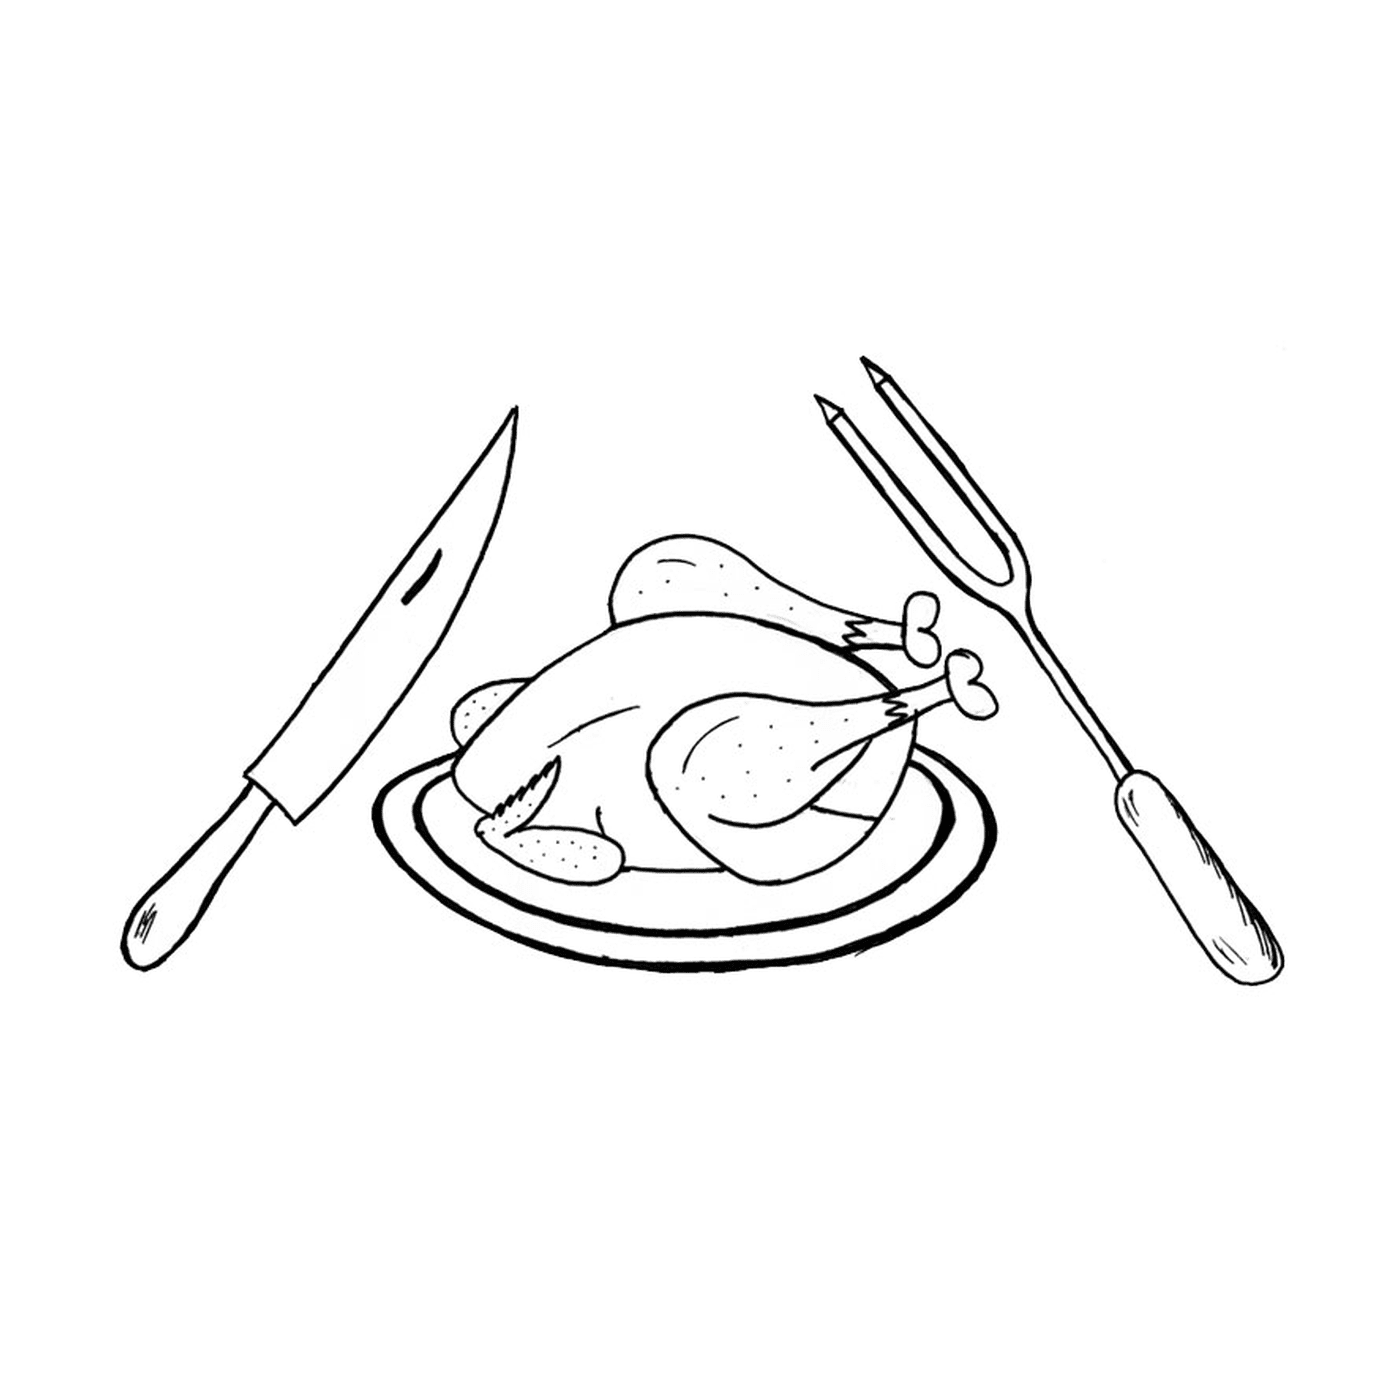  A chicken on a plate with a knife, a fork and a fork 